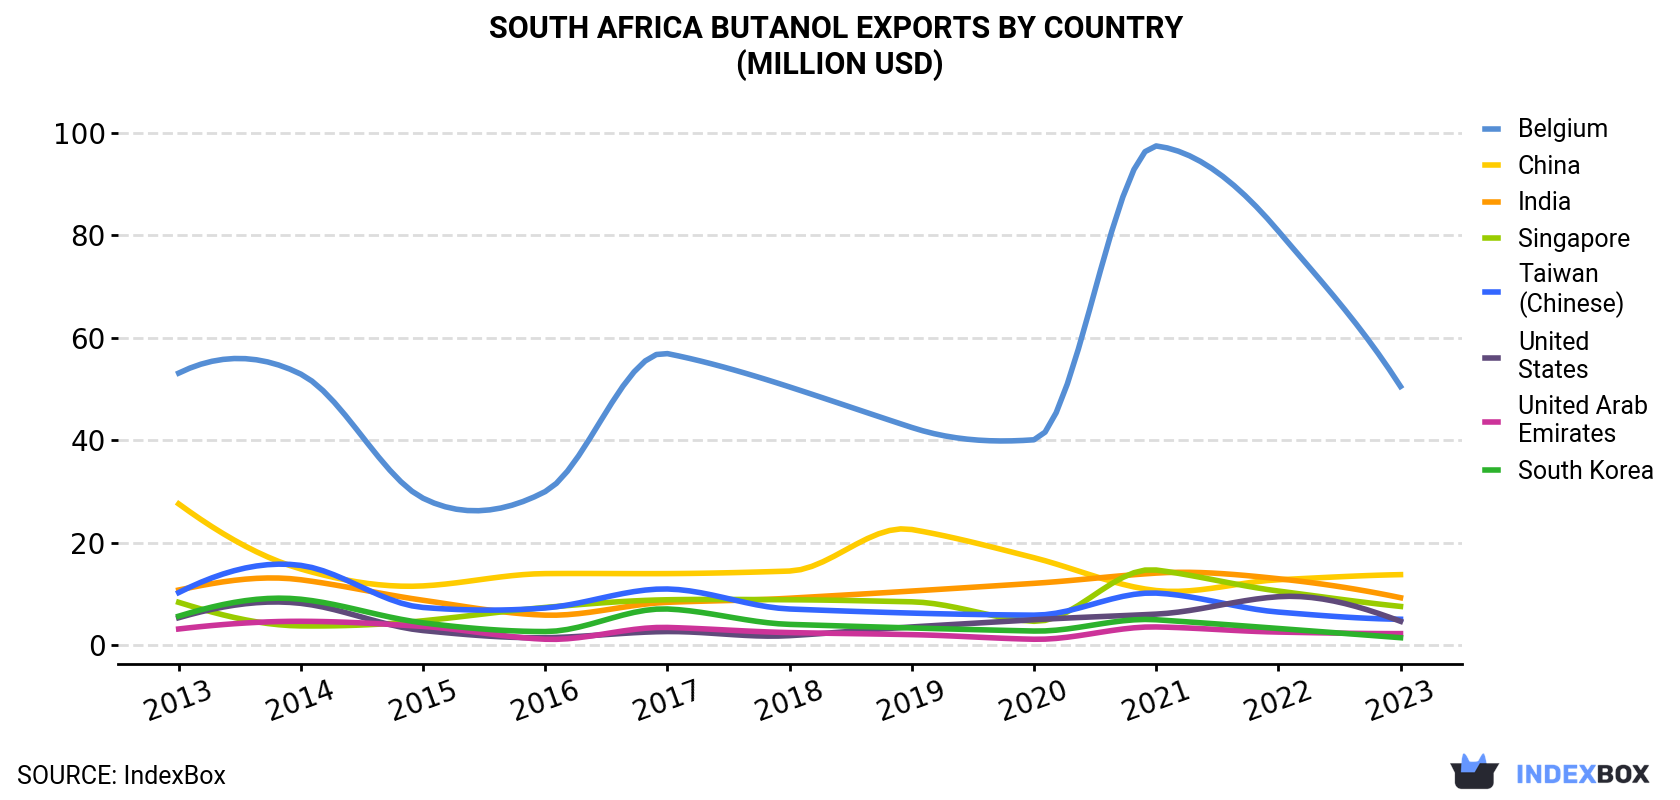 South Africa Butanol Exports By Country (Million USD)